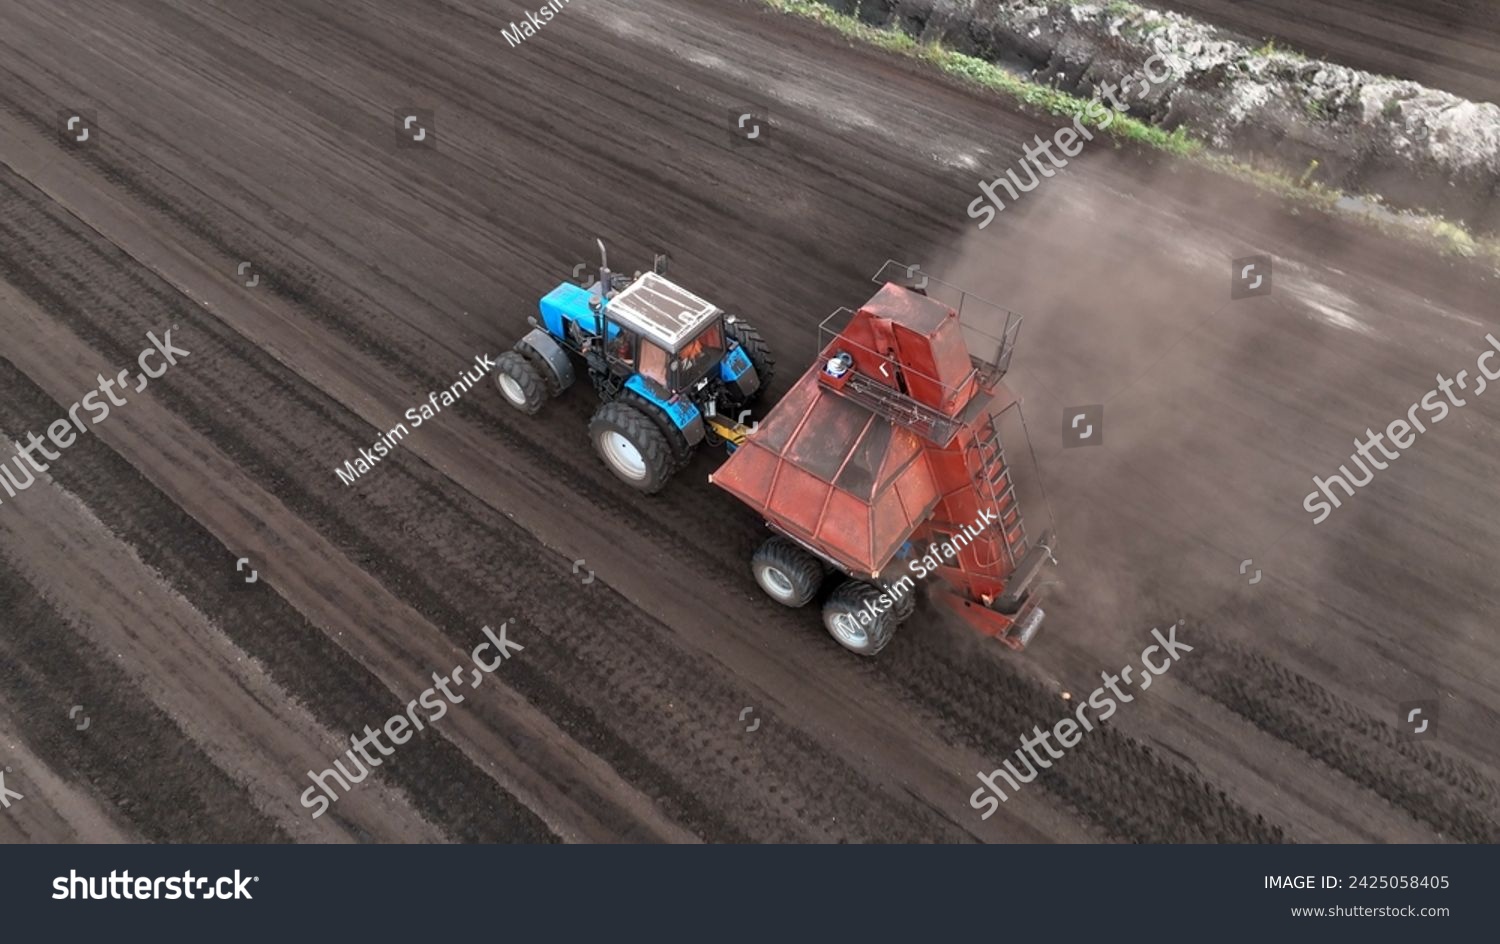 Peat Harvester Tractor on Collecting Extracting Peat. Mining and harvesting peatland. Area drained of the mire are used for peat extraction. Drainage and destruction of peat bogs. #2425058405